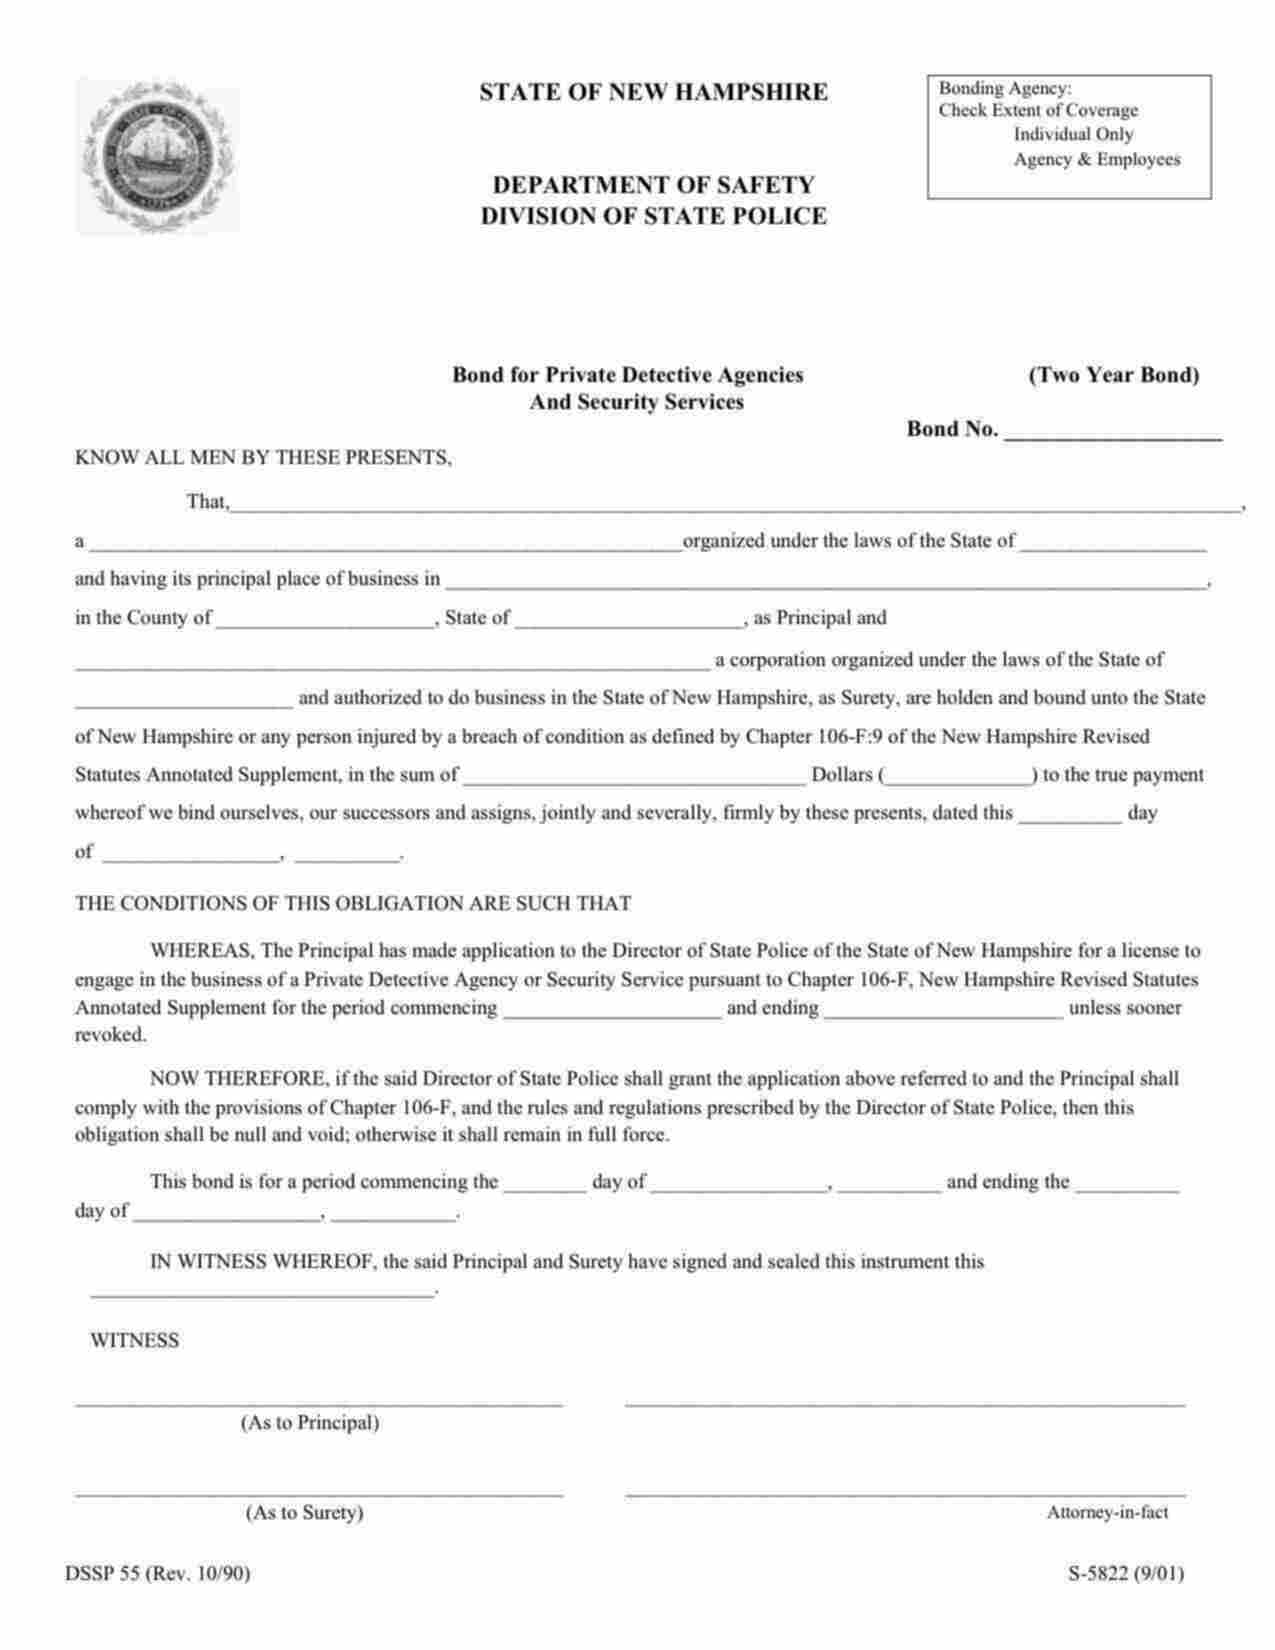 New Hampshire Private Detective Agencies and Security Services (Agency & Employees) Bond Form